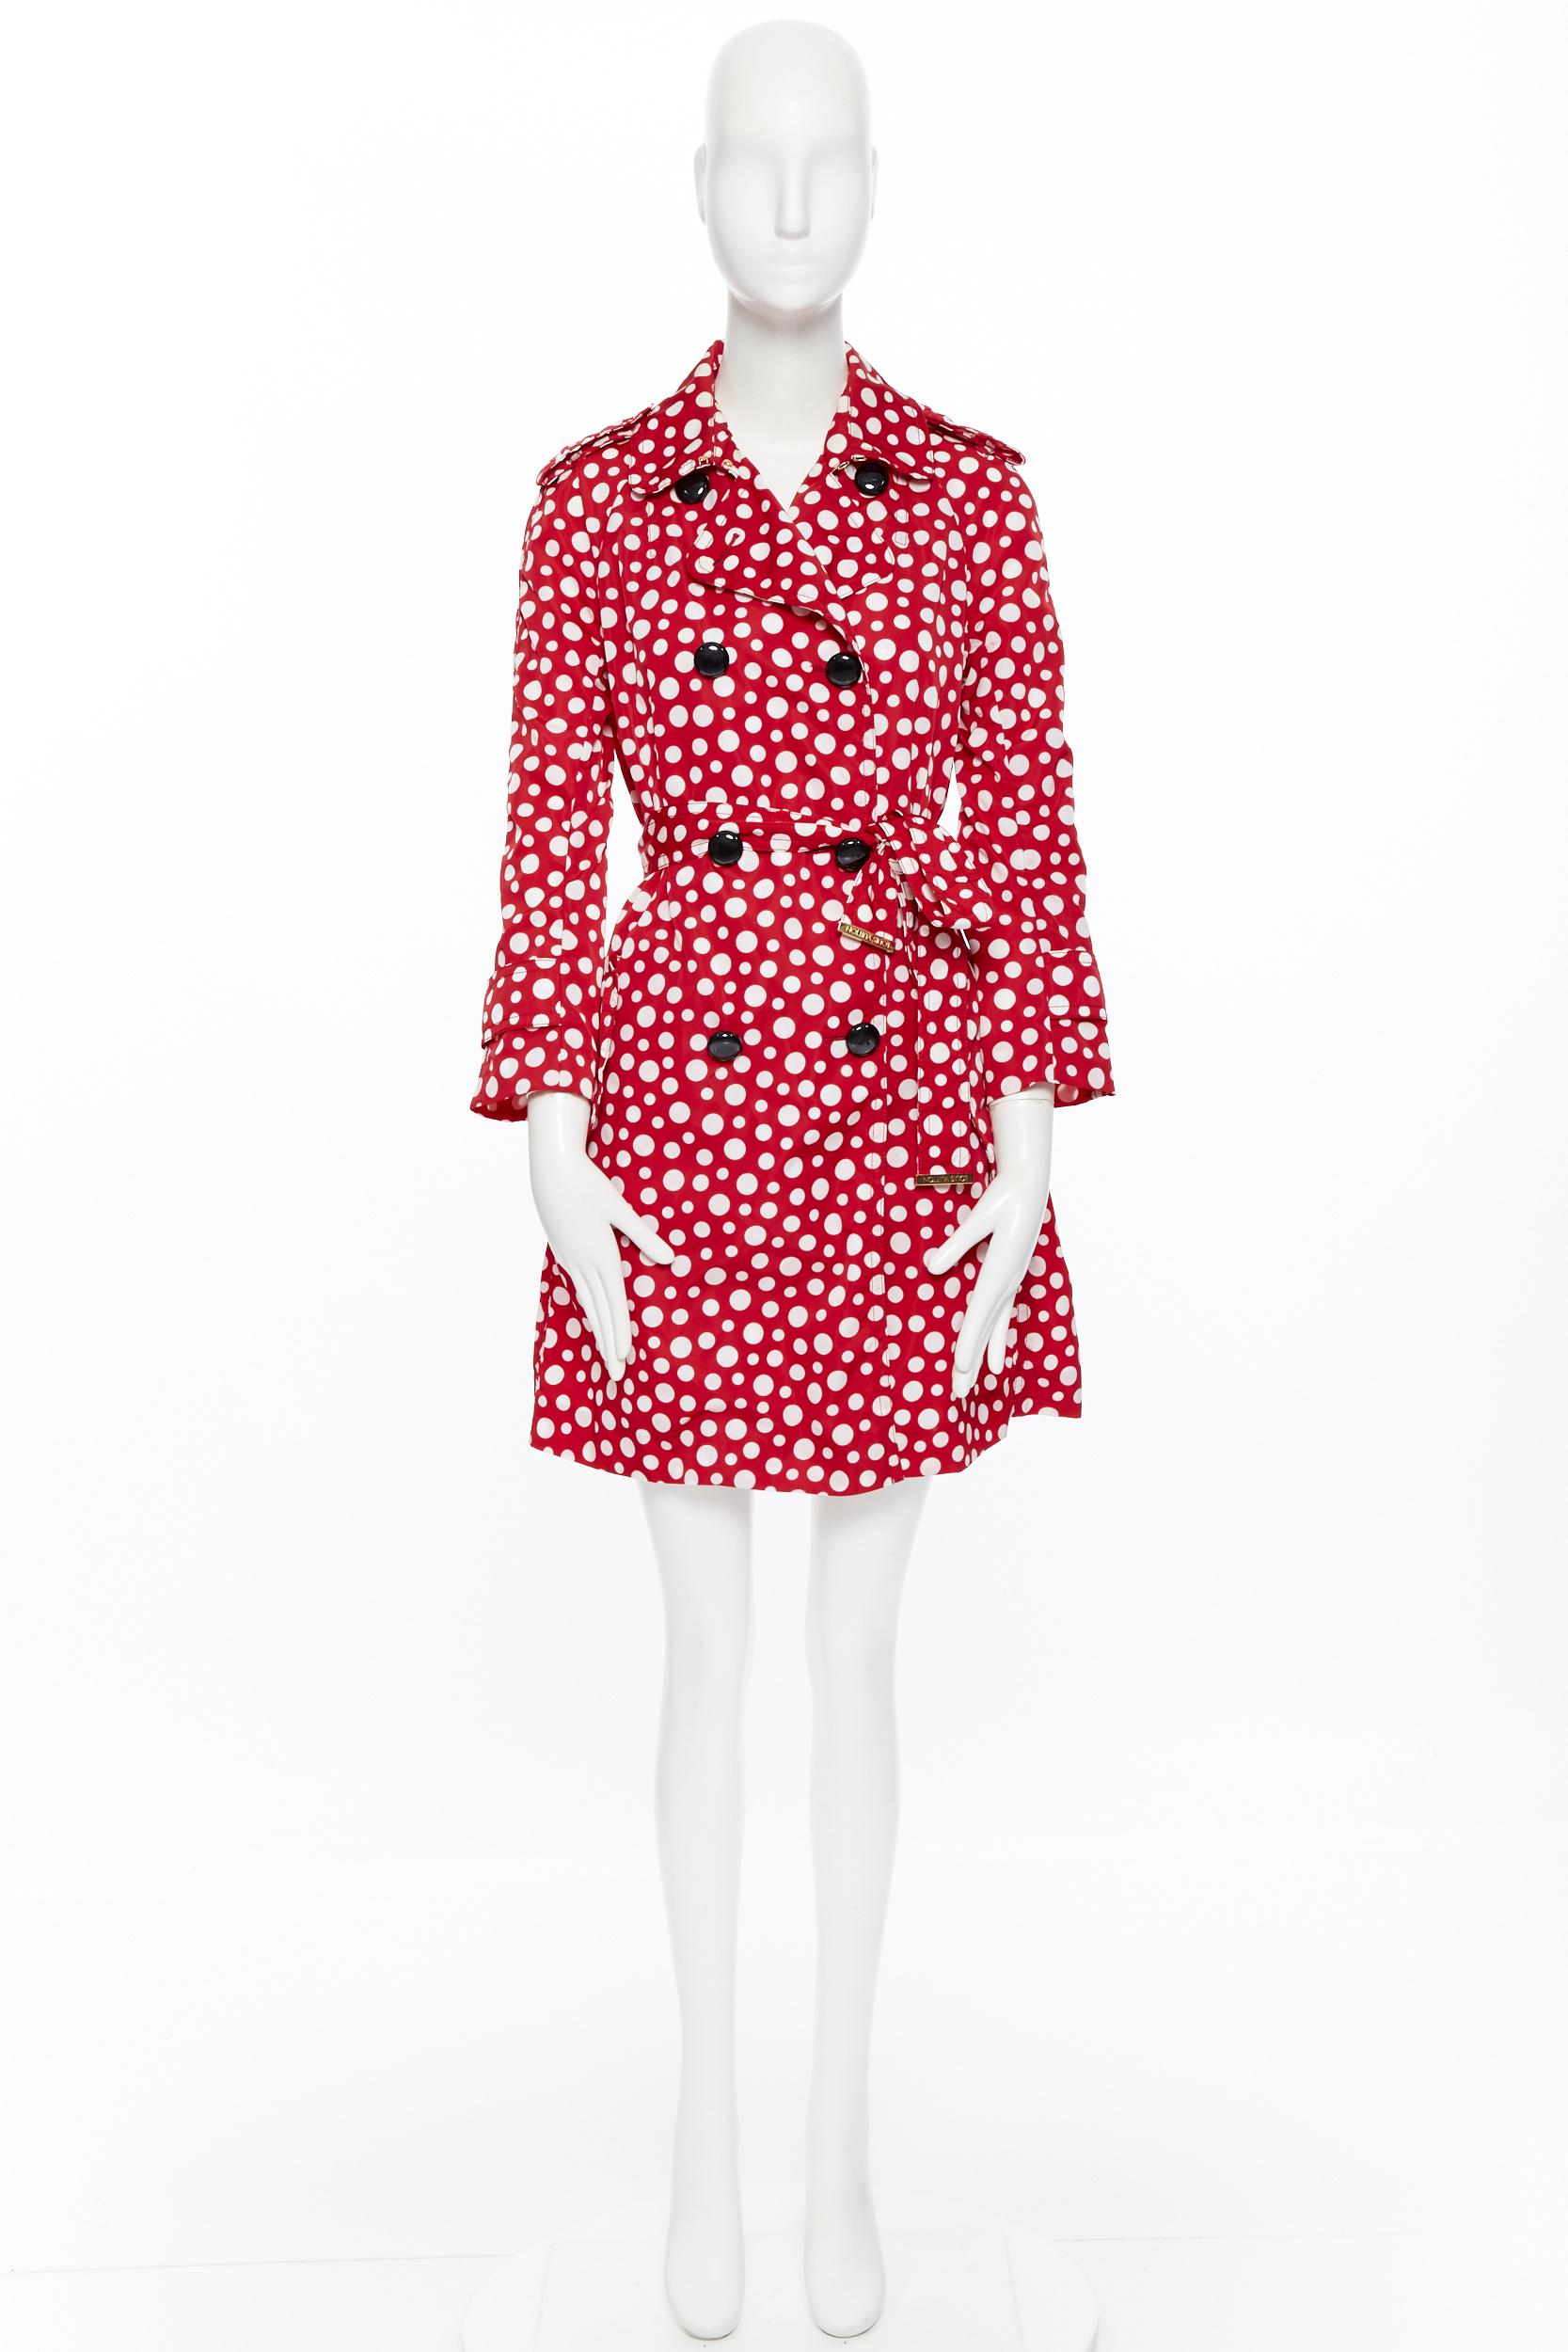 runway LOUIS VUITTON YAYOI KUSAMA red white spot print belted trench coat FR36 S
Brand: Louis Vuitton
Designer: Yayoi Kusama
Model Name / Style: Trench coat
Material: Polyamide
Color: Red and white spot
Pattern: Polka Dot
Closure: Button
Lining